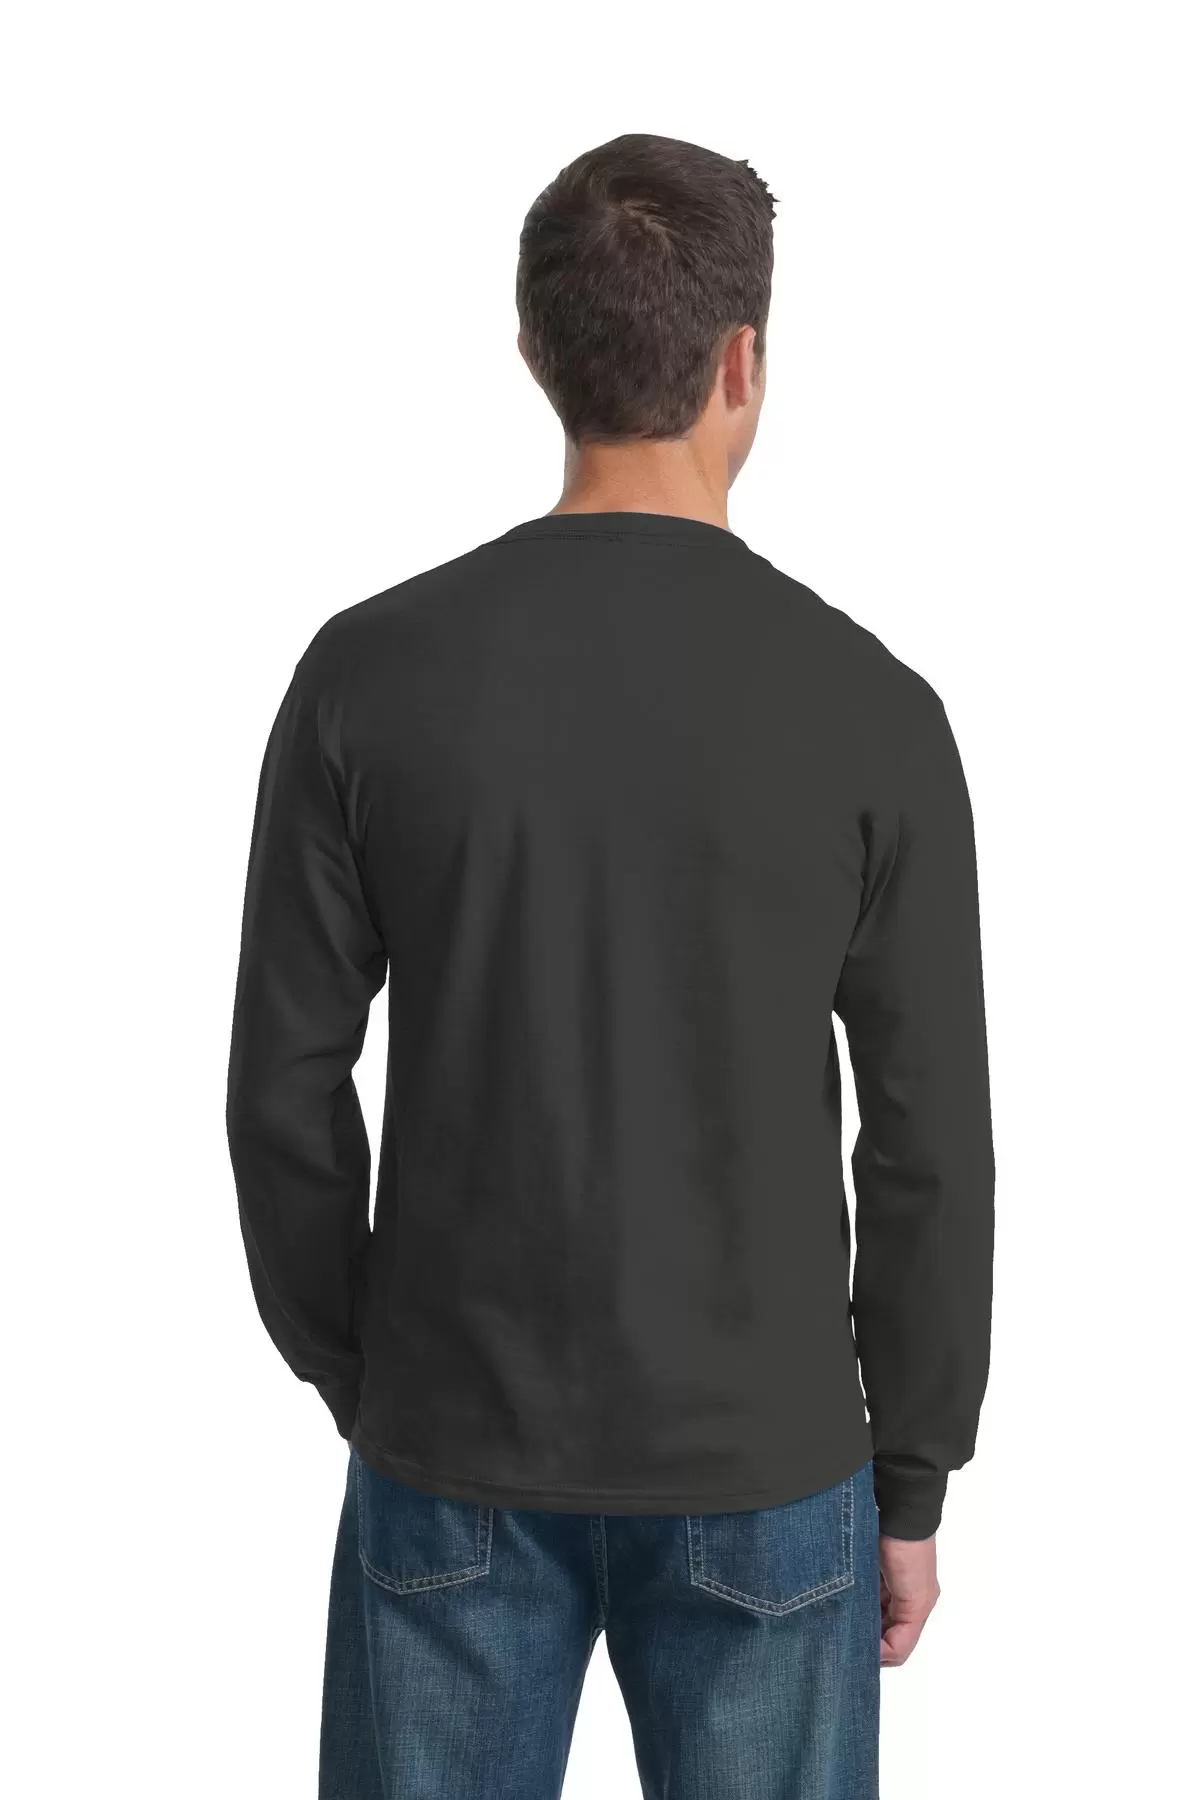 4930 Fruit of the Loom Heavy Cotton HD Long Sleeve T-shirt - From $4.54